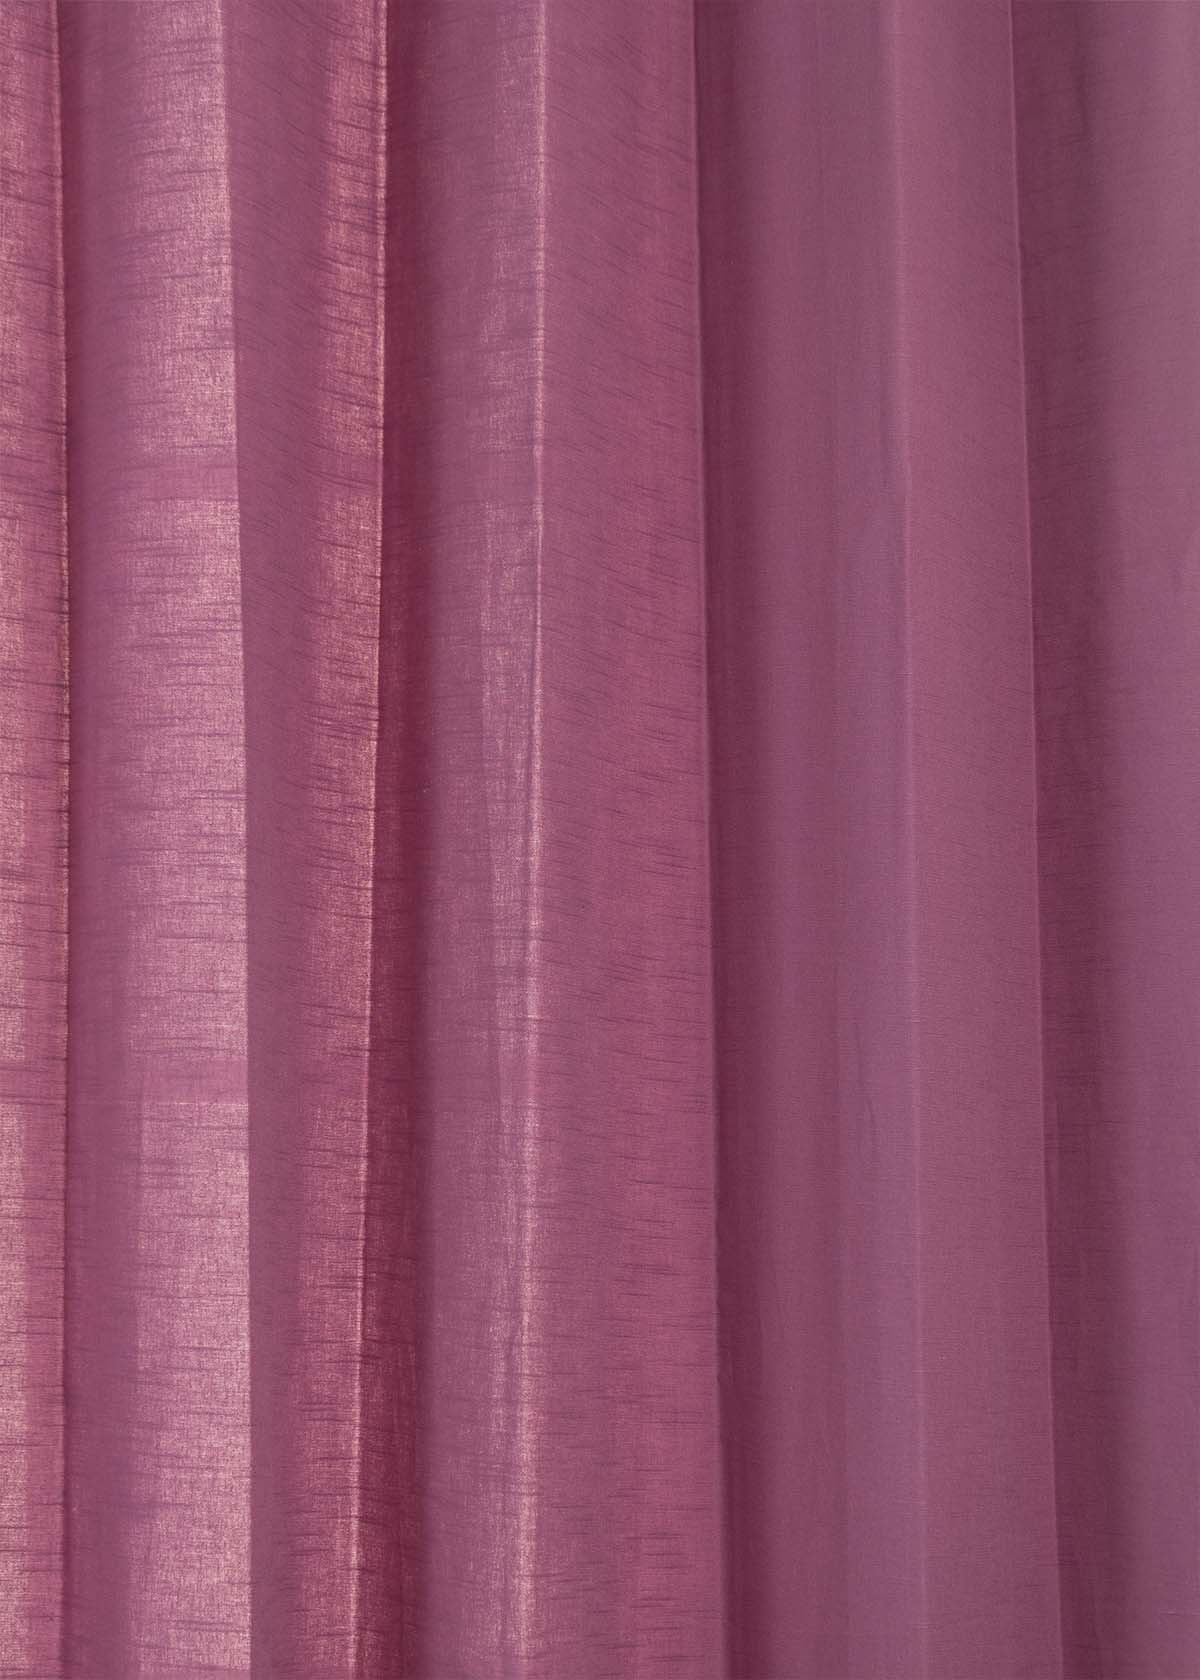 Solid cotton Fabric - Grape Solid